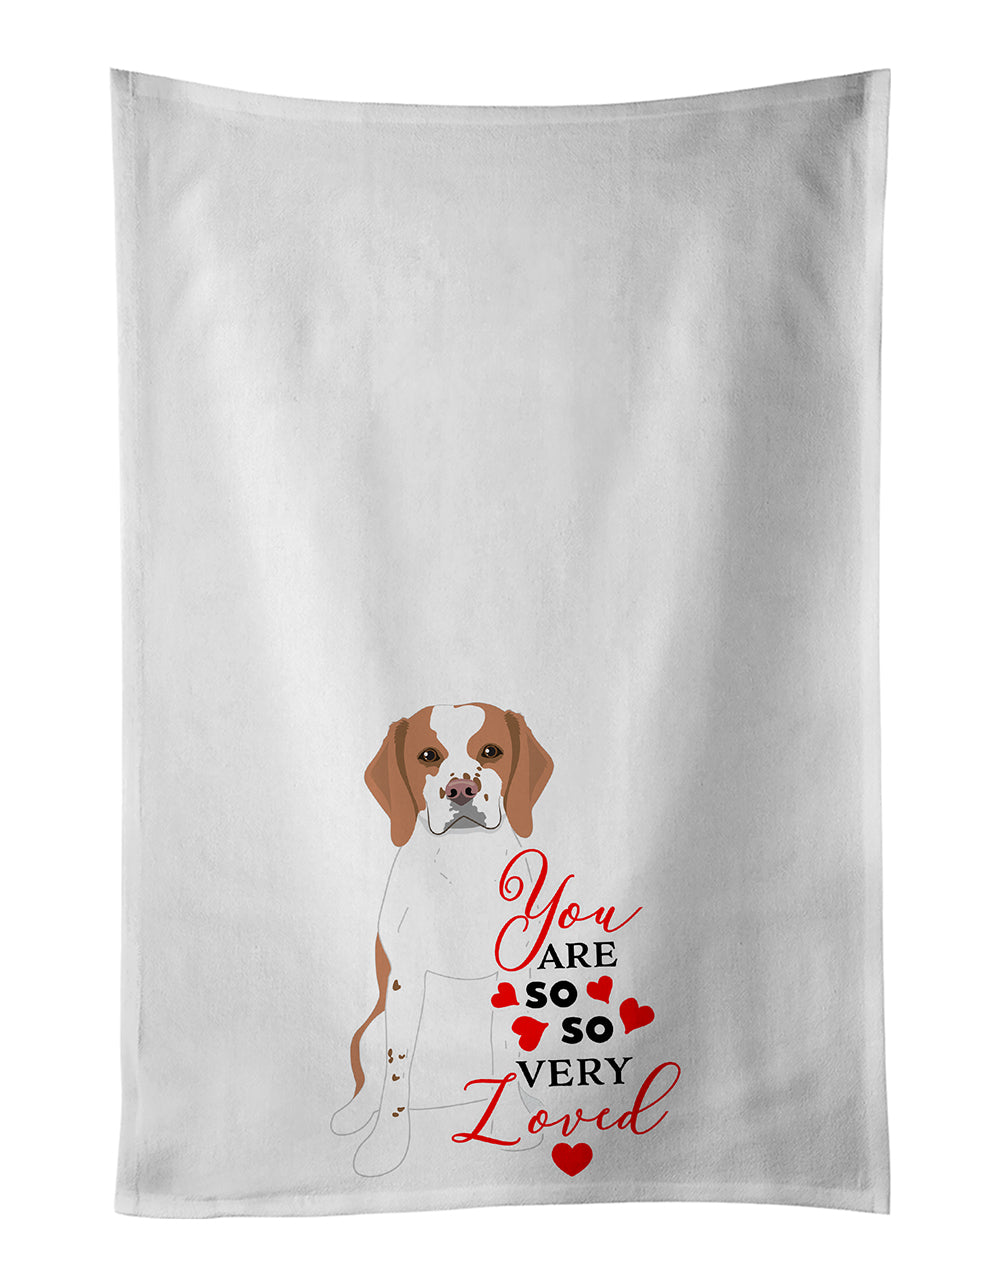 Buy this Beagle Red and White Red Ticked #1 so Loved White Kitchen Towel Set of 2